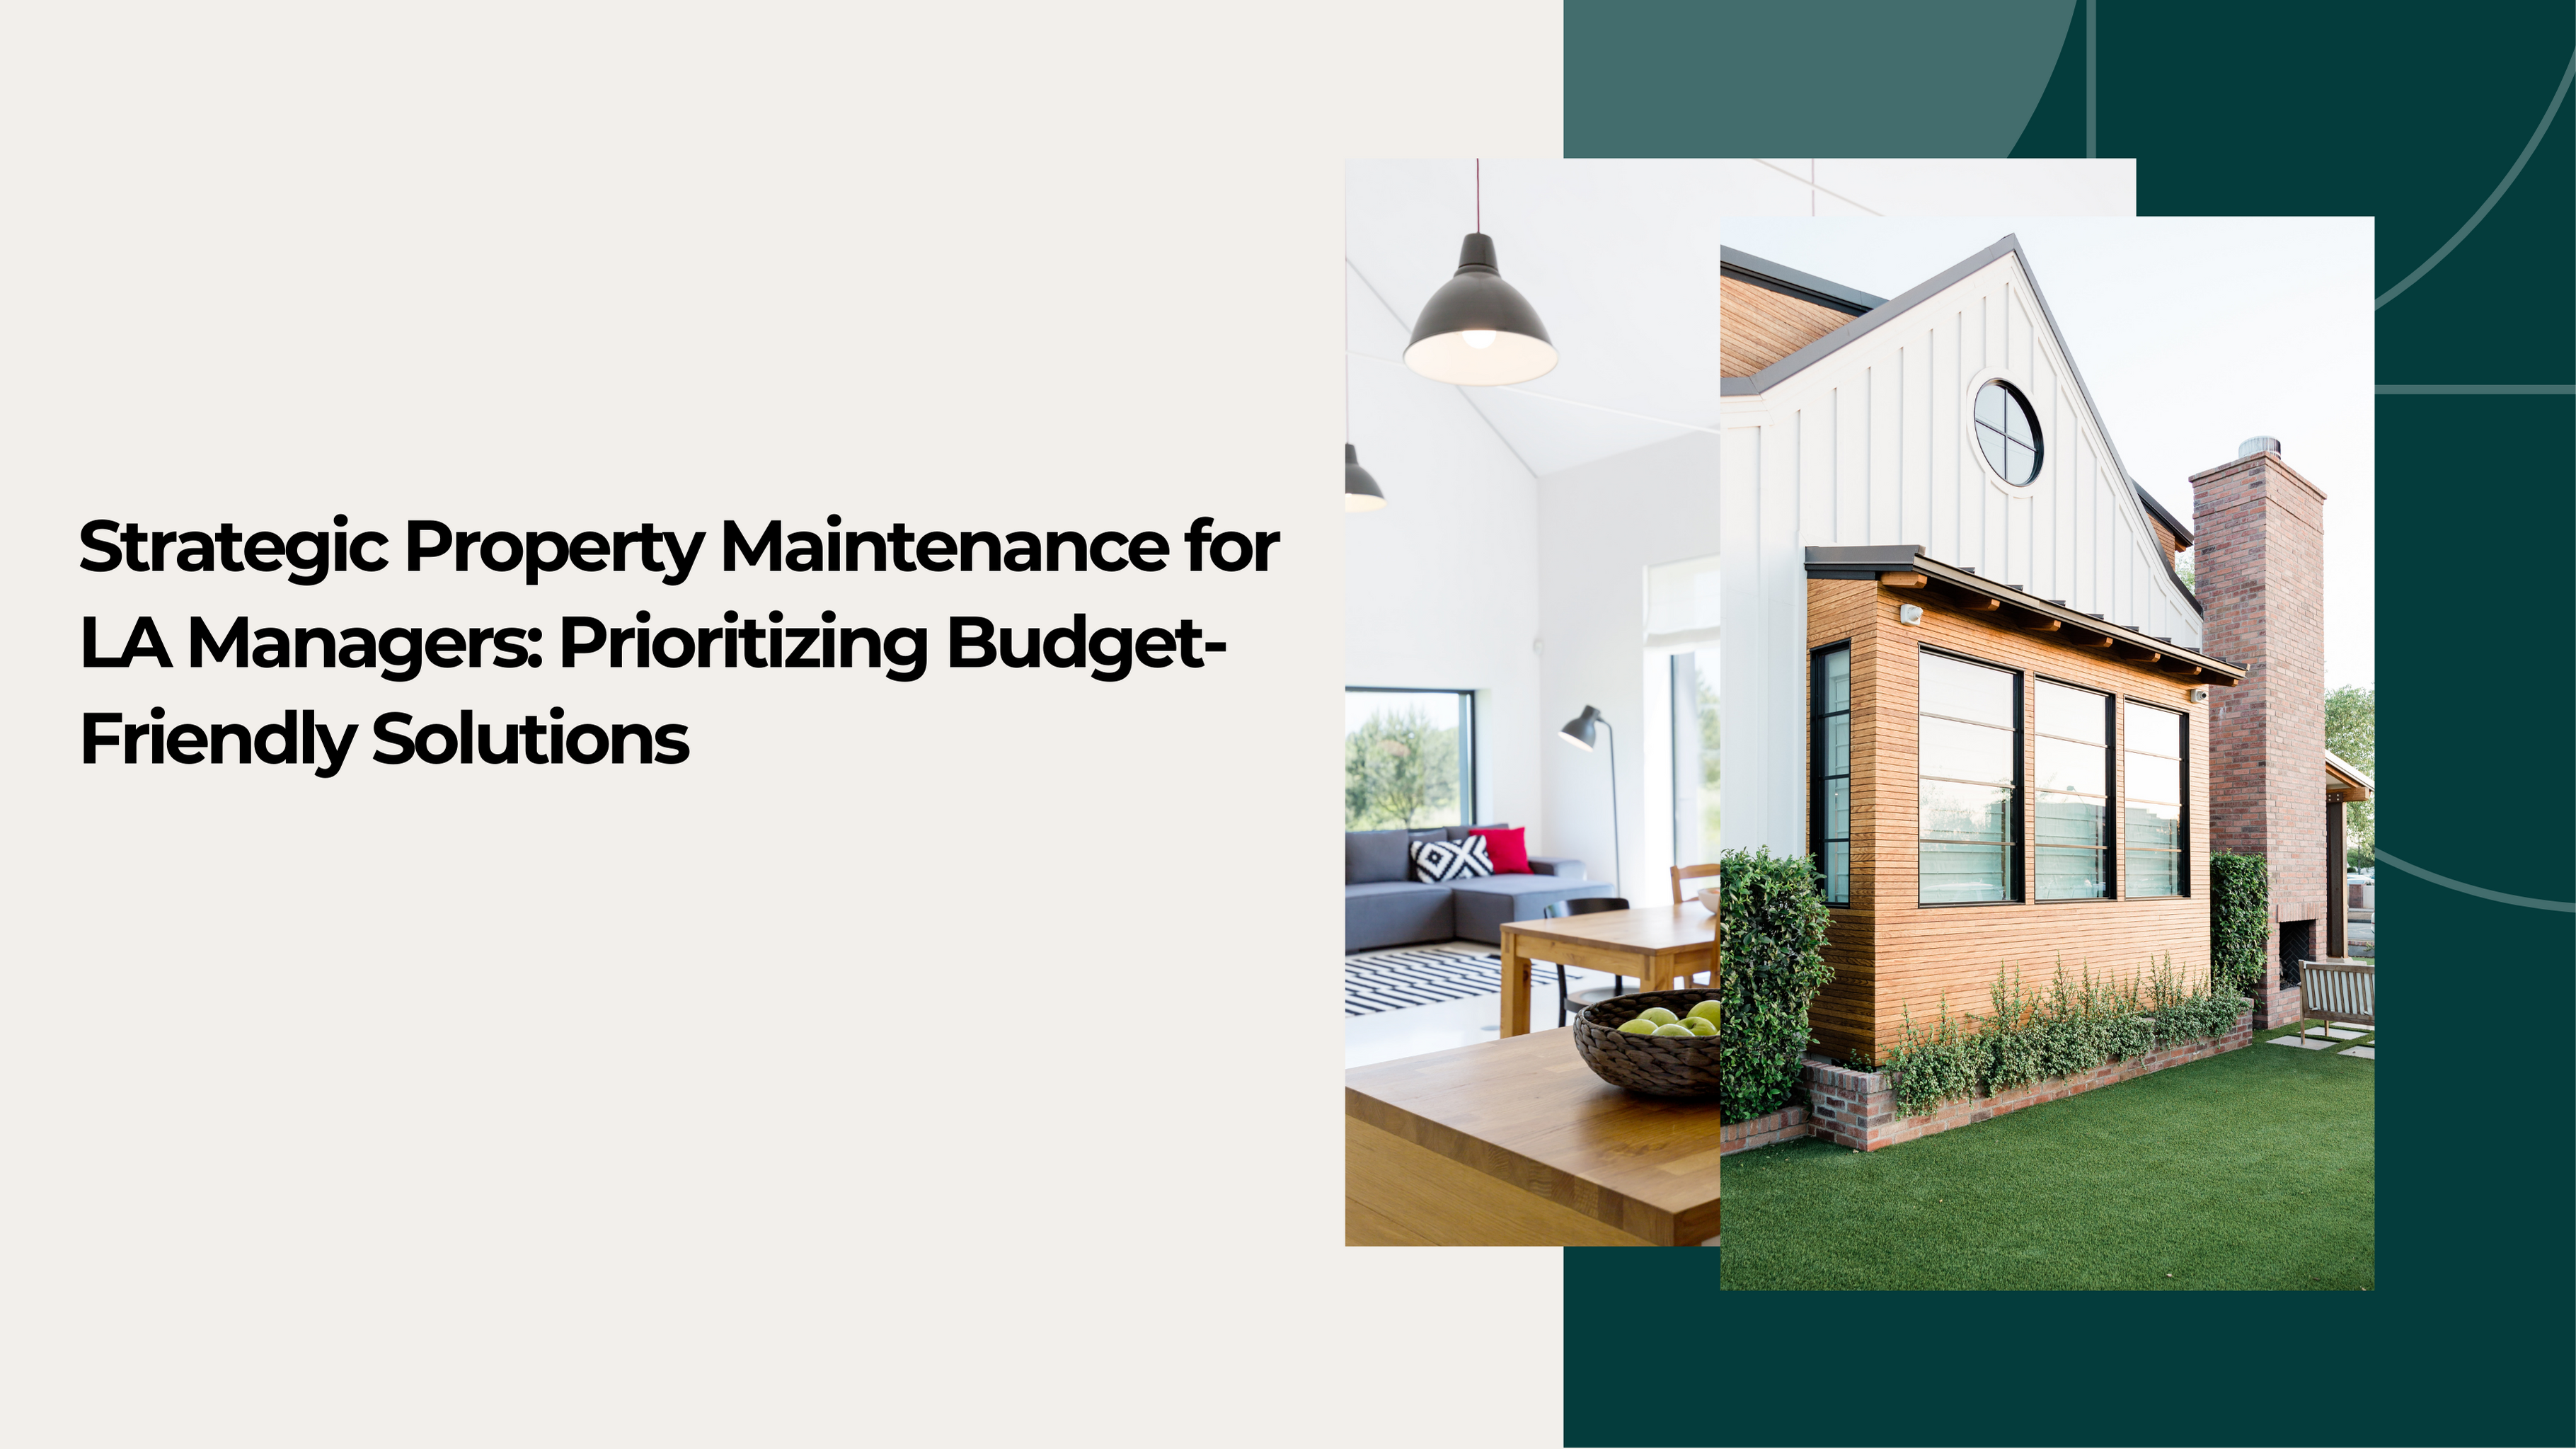 "Strategic Property Maintenance for LA Managers: Prioritizing Budget-Friendly Solutions flyer